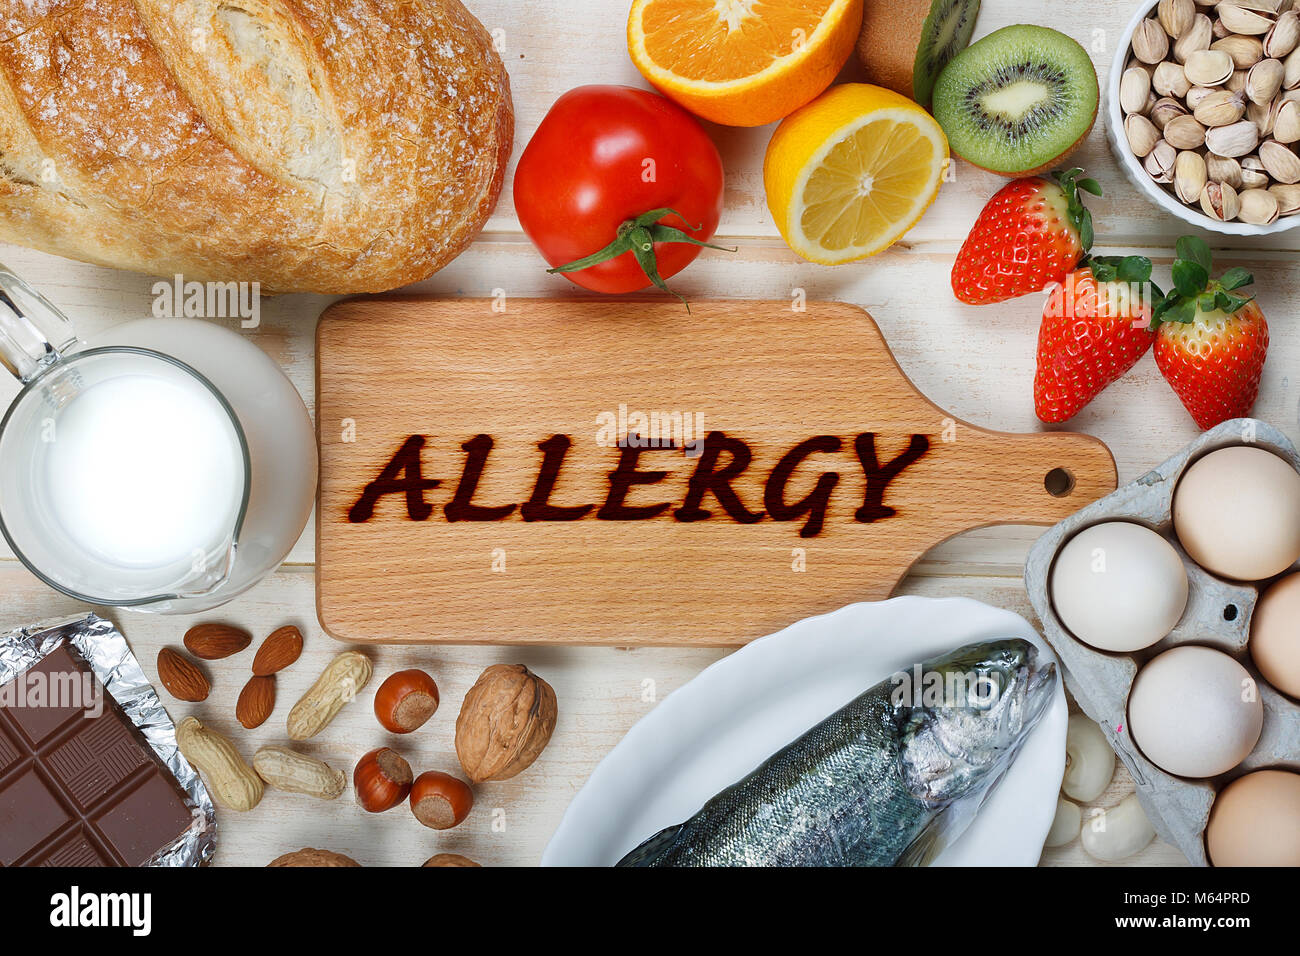 Allergy food concept. Food on wooden table Stock Photo